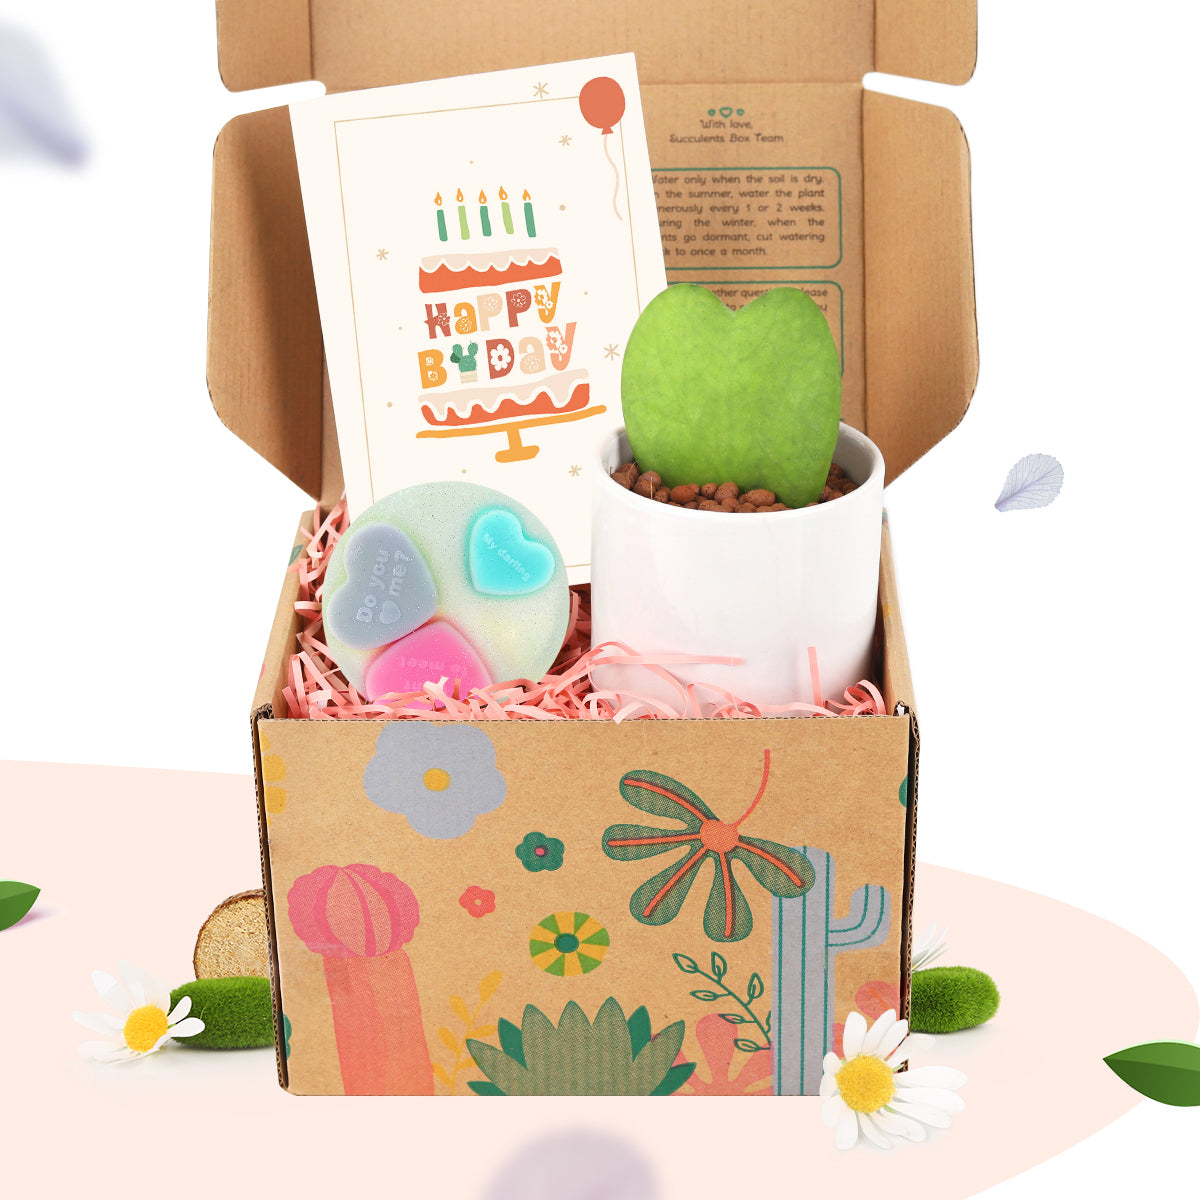 Buy Live Plant Gift Set online, Houseplant Gift Box Delivery, Gifts for Plant Lovers, Unique houseplant gift box with Jelly soap